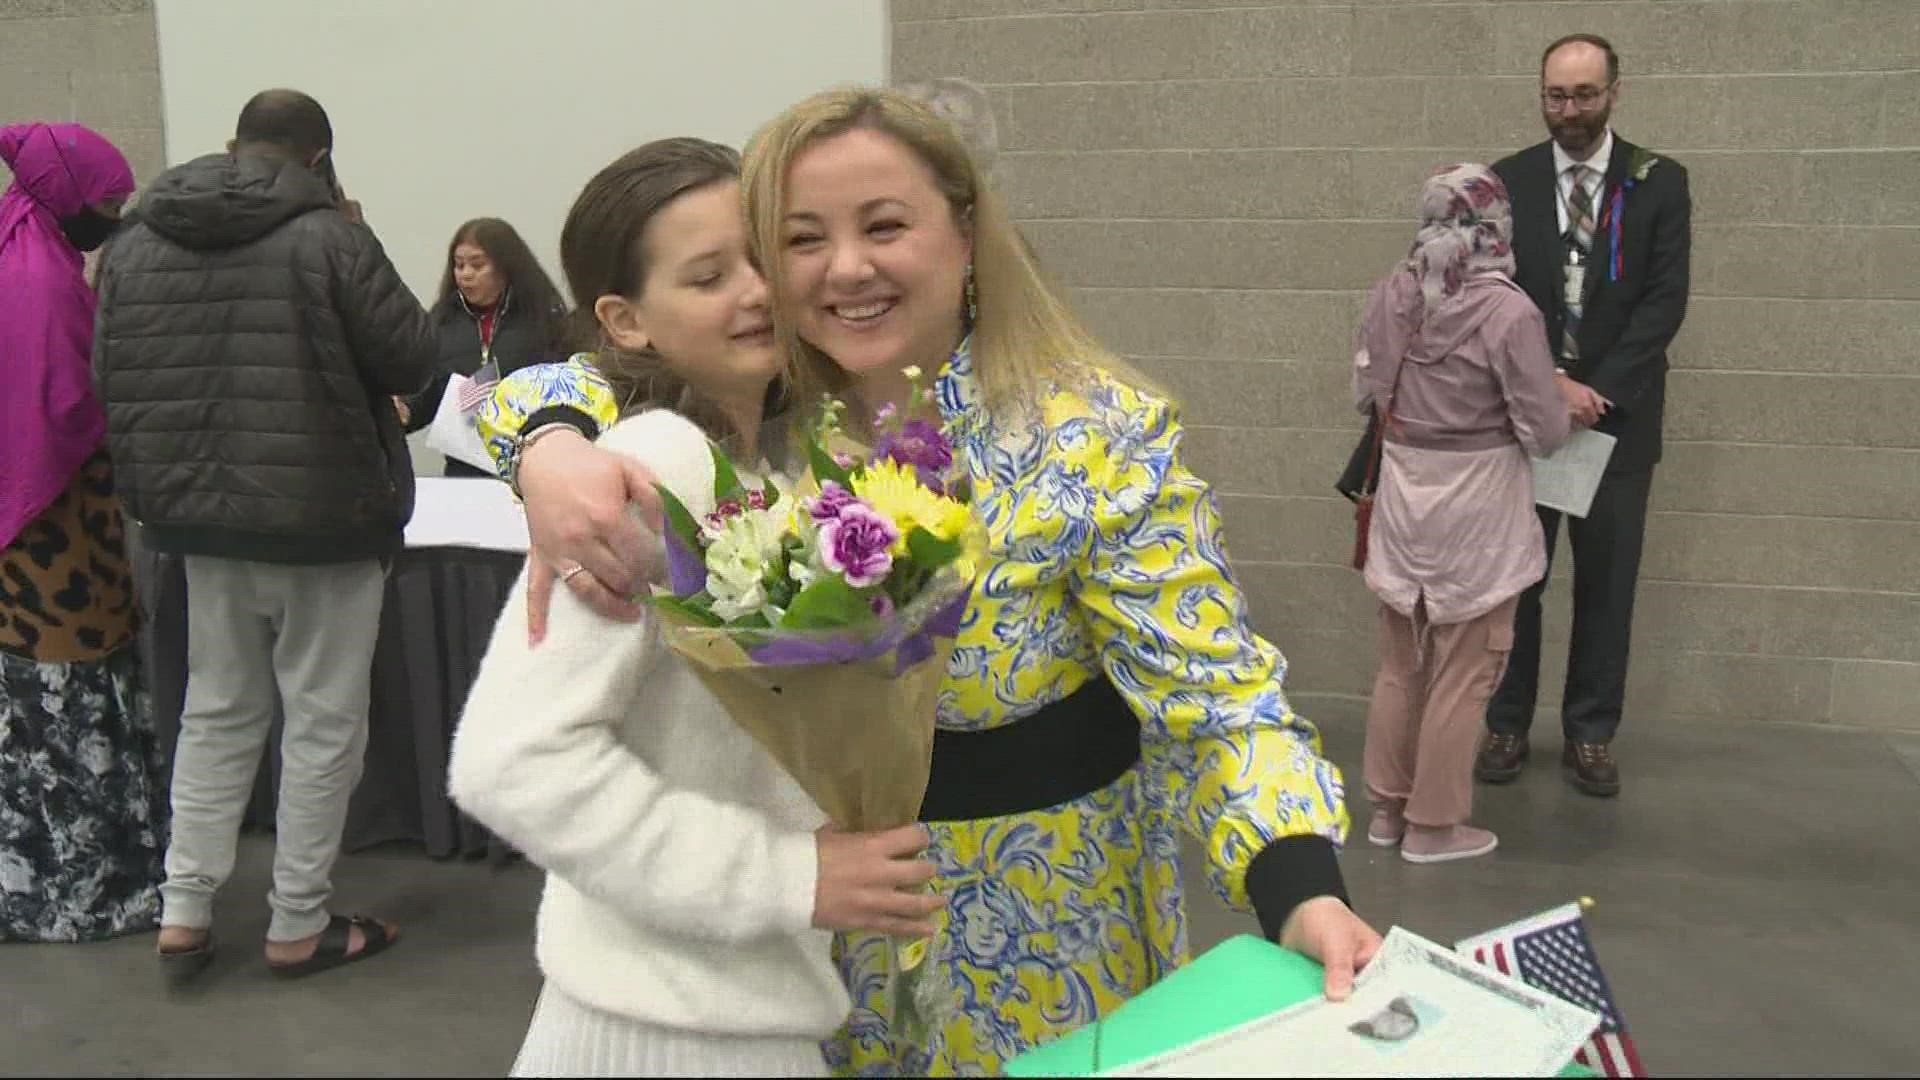 Evghenia Sincariuc, who moved to America from Ukraine in 2016, described citizenship as an amazing dream as she celebrated with her family.